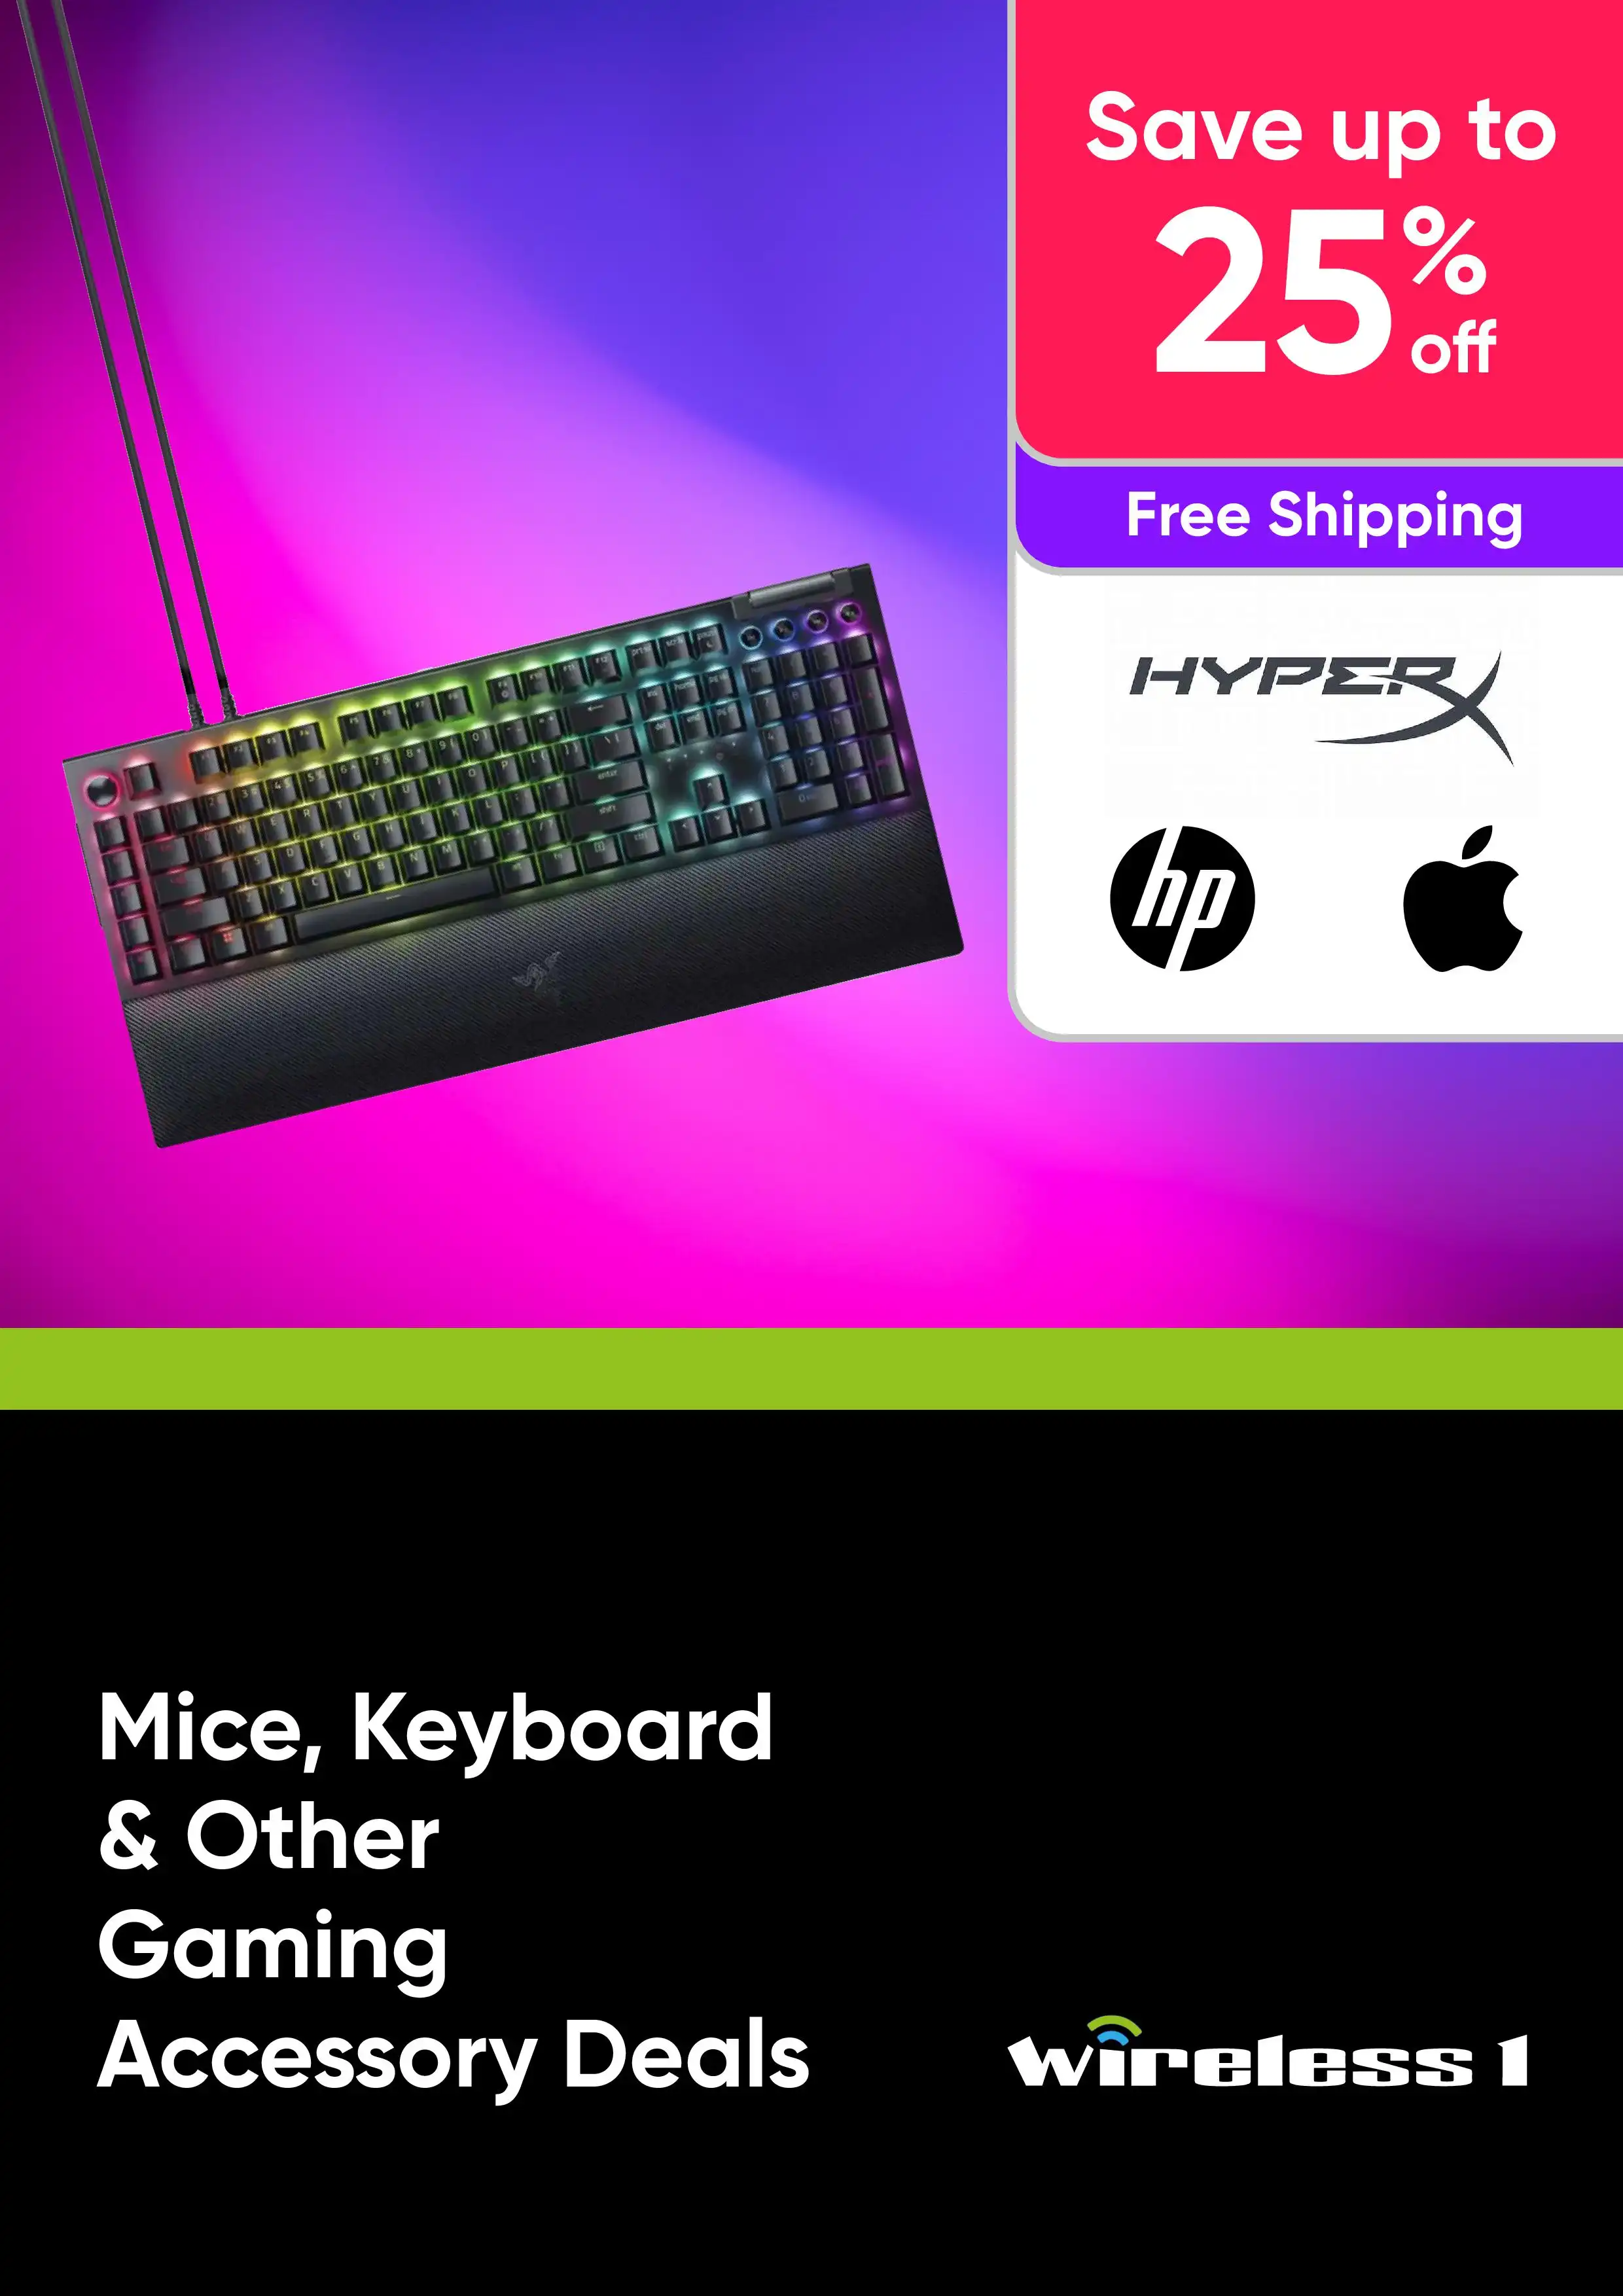 Up to 25% off Mice, Keyboards & Other Gaming Accessories